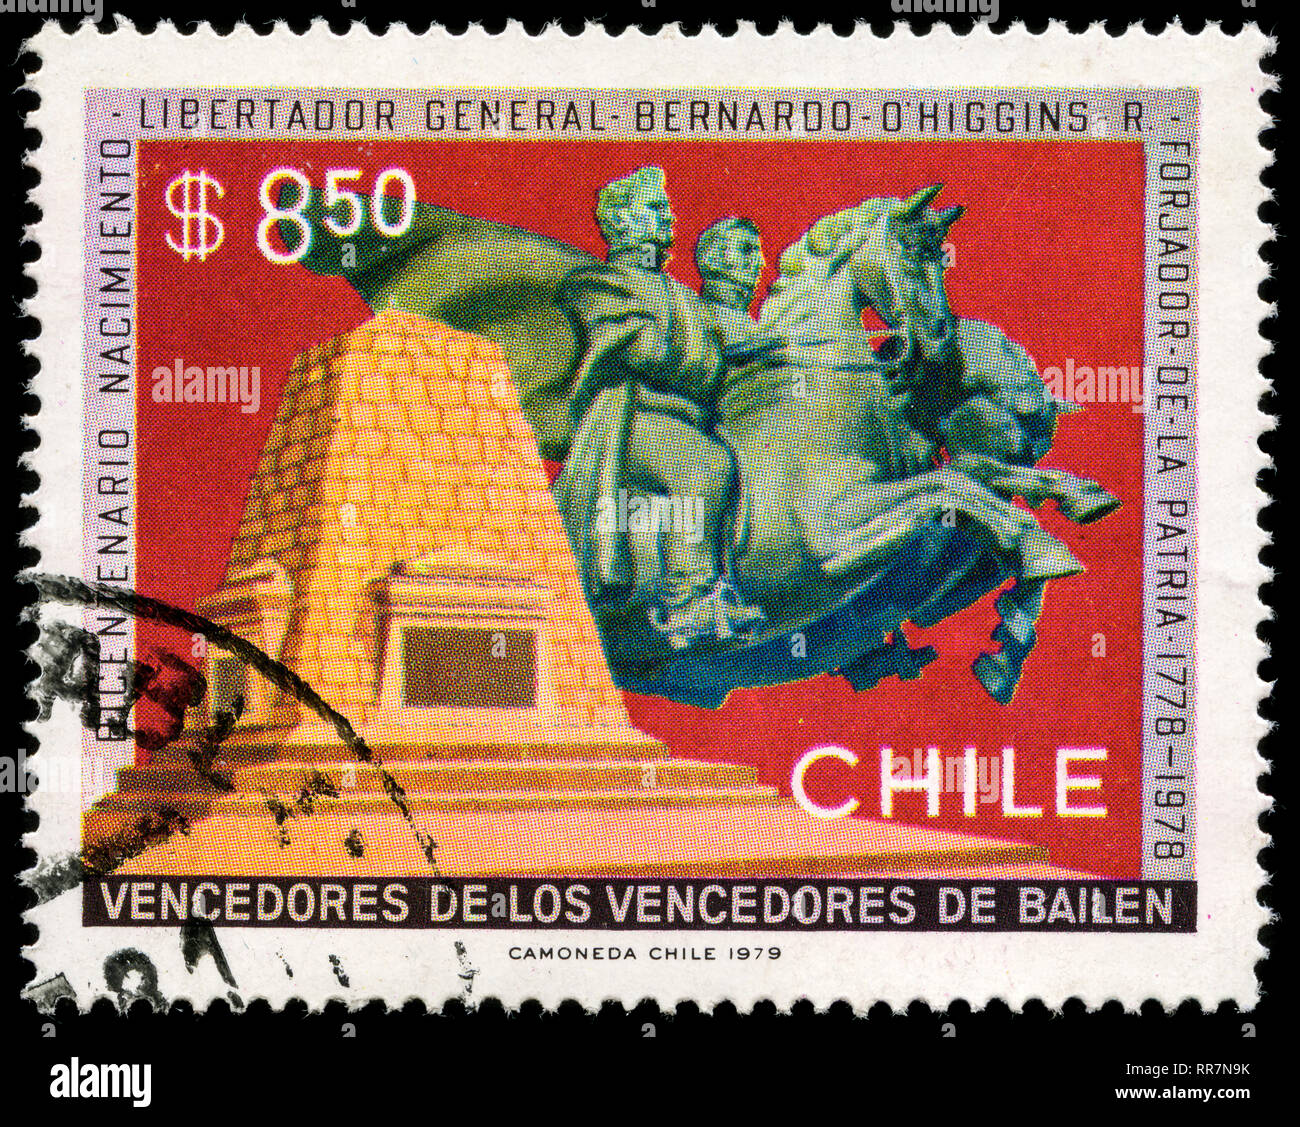 Postage stamp from Chile in the 200th birthday of General Bernardo O'Higgins series issued in 1979 Stock Photo